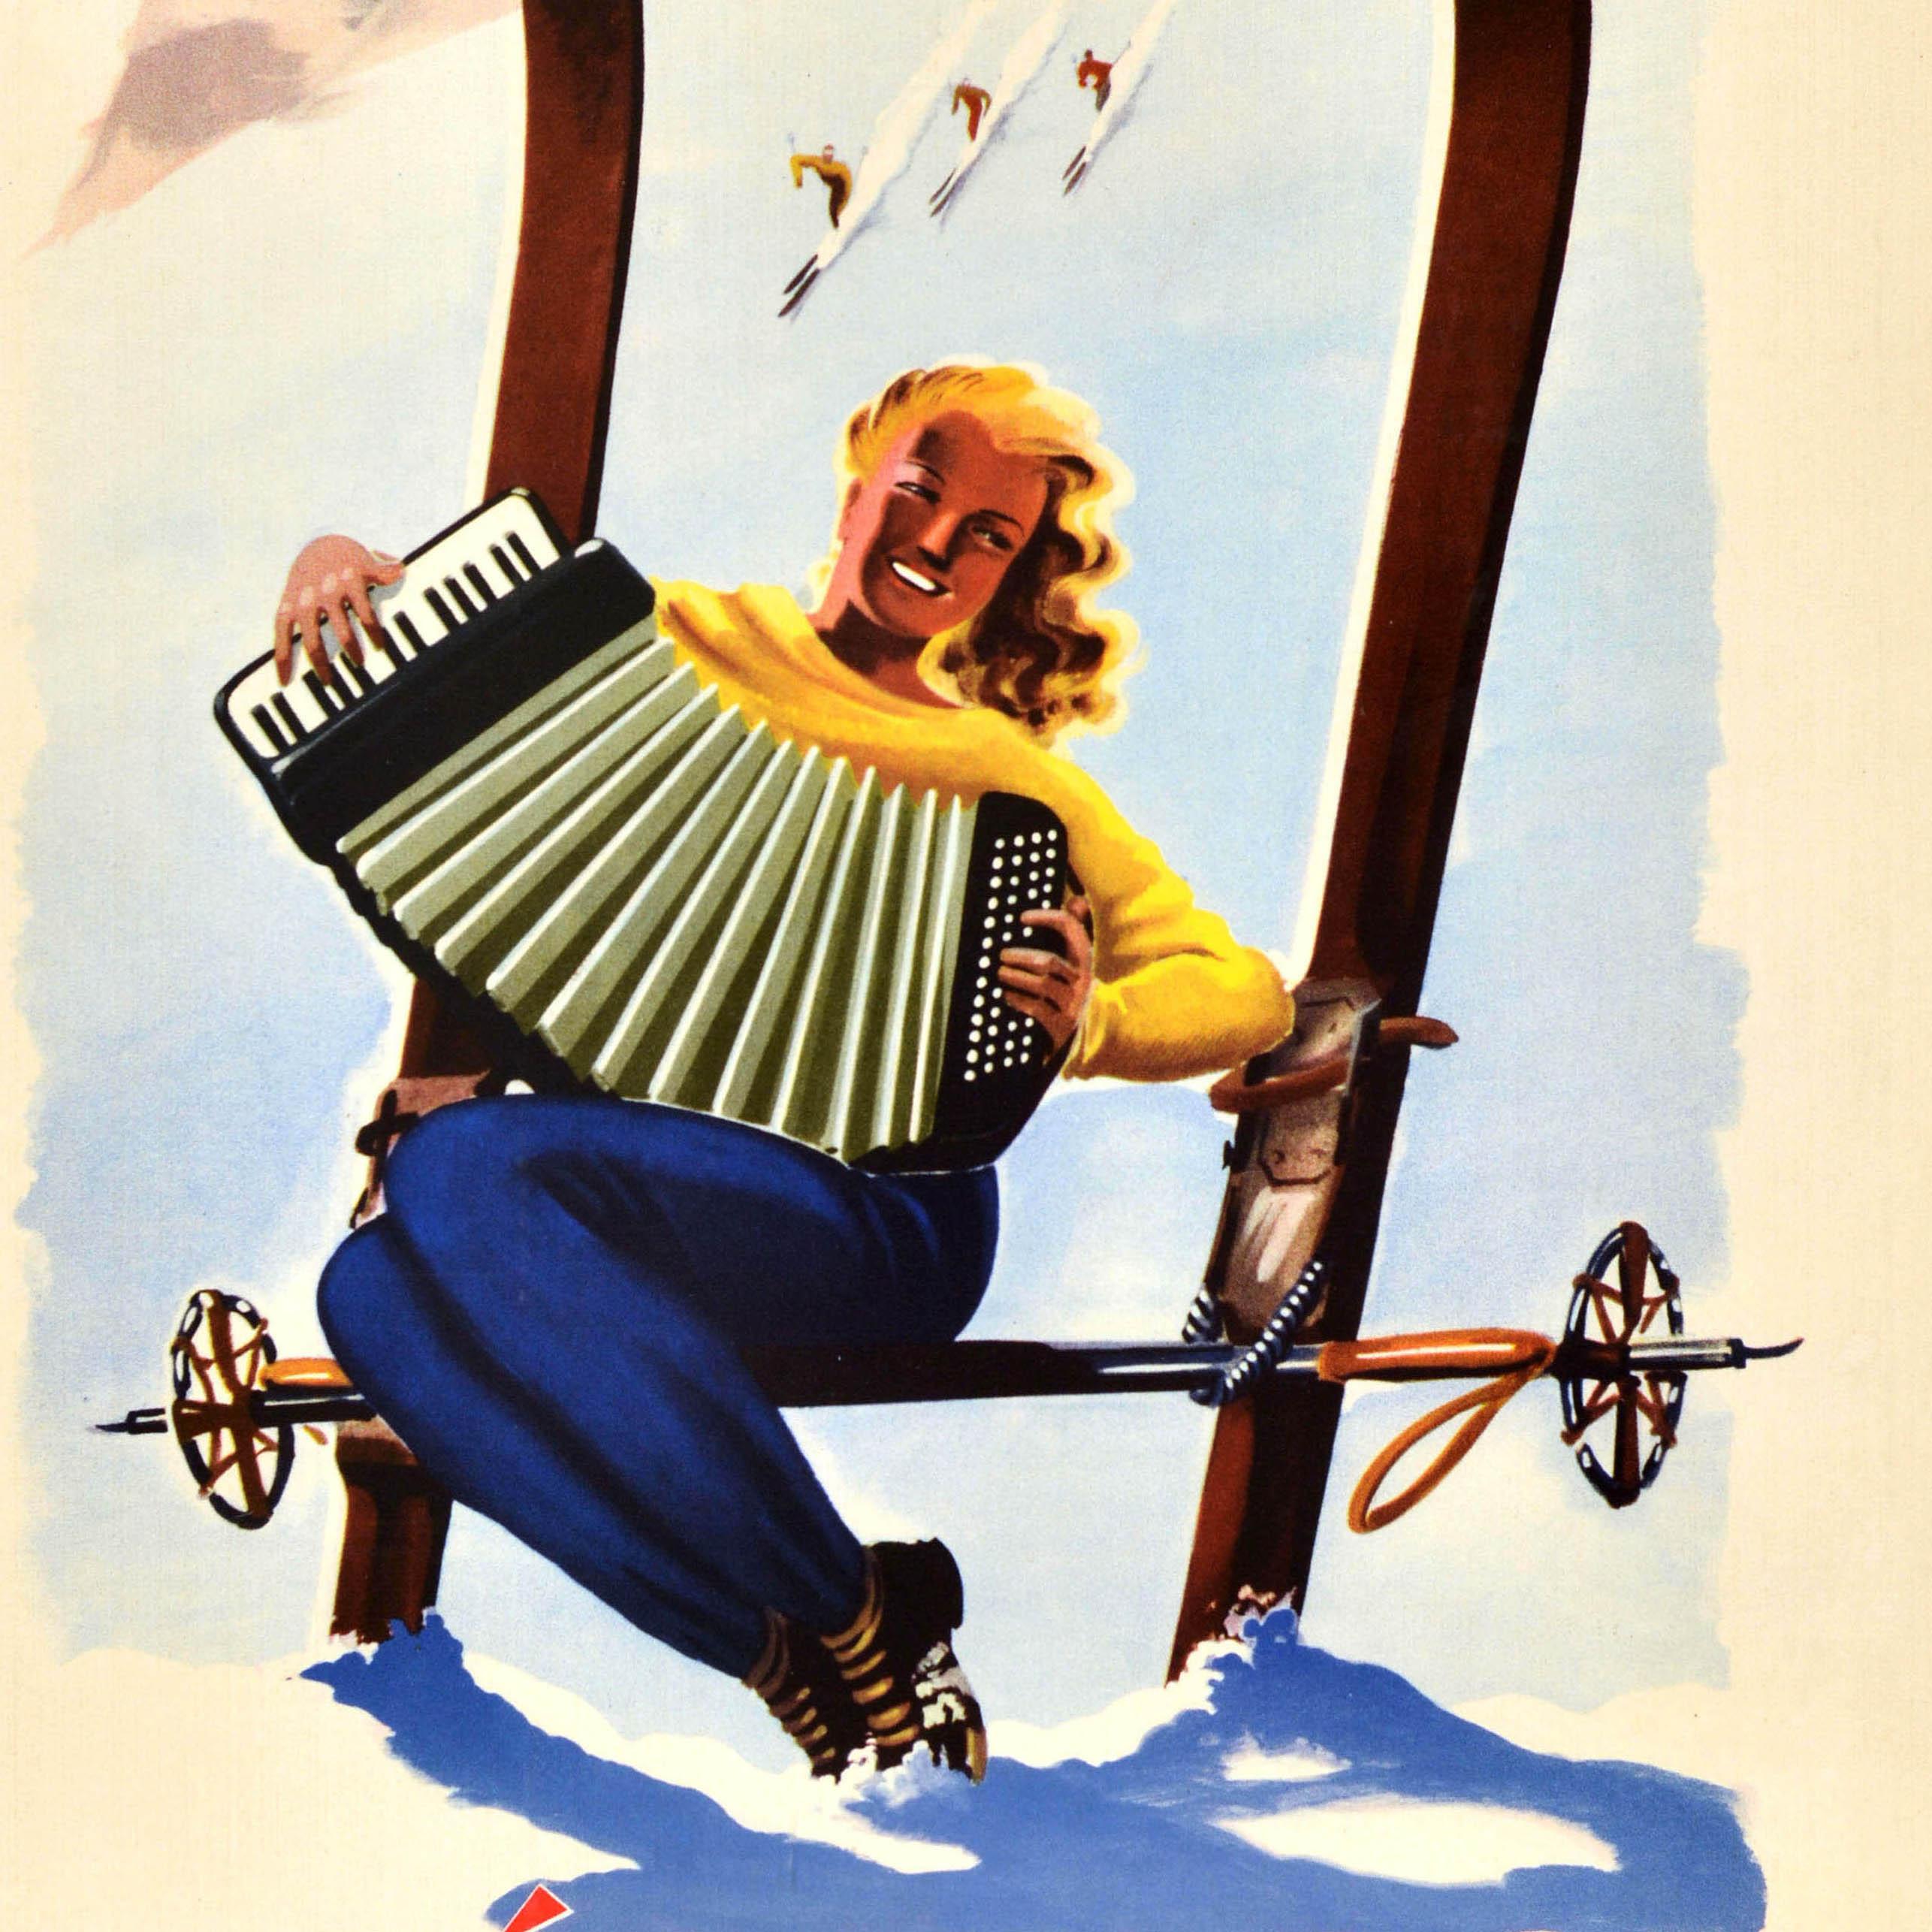 Original vintage winter sport travel poster for the Aosta Valley in Italy - Vallee d'Aoste (Italie) Courmayeur Gressoney La Thuile Pila Ayas Champoluc Valtournance Breuil - featuring a fun illustration of a smiling lady in a yellow jumper and blue